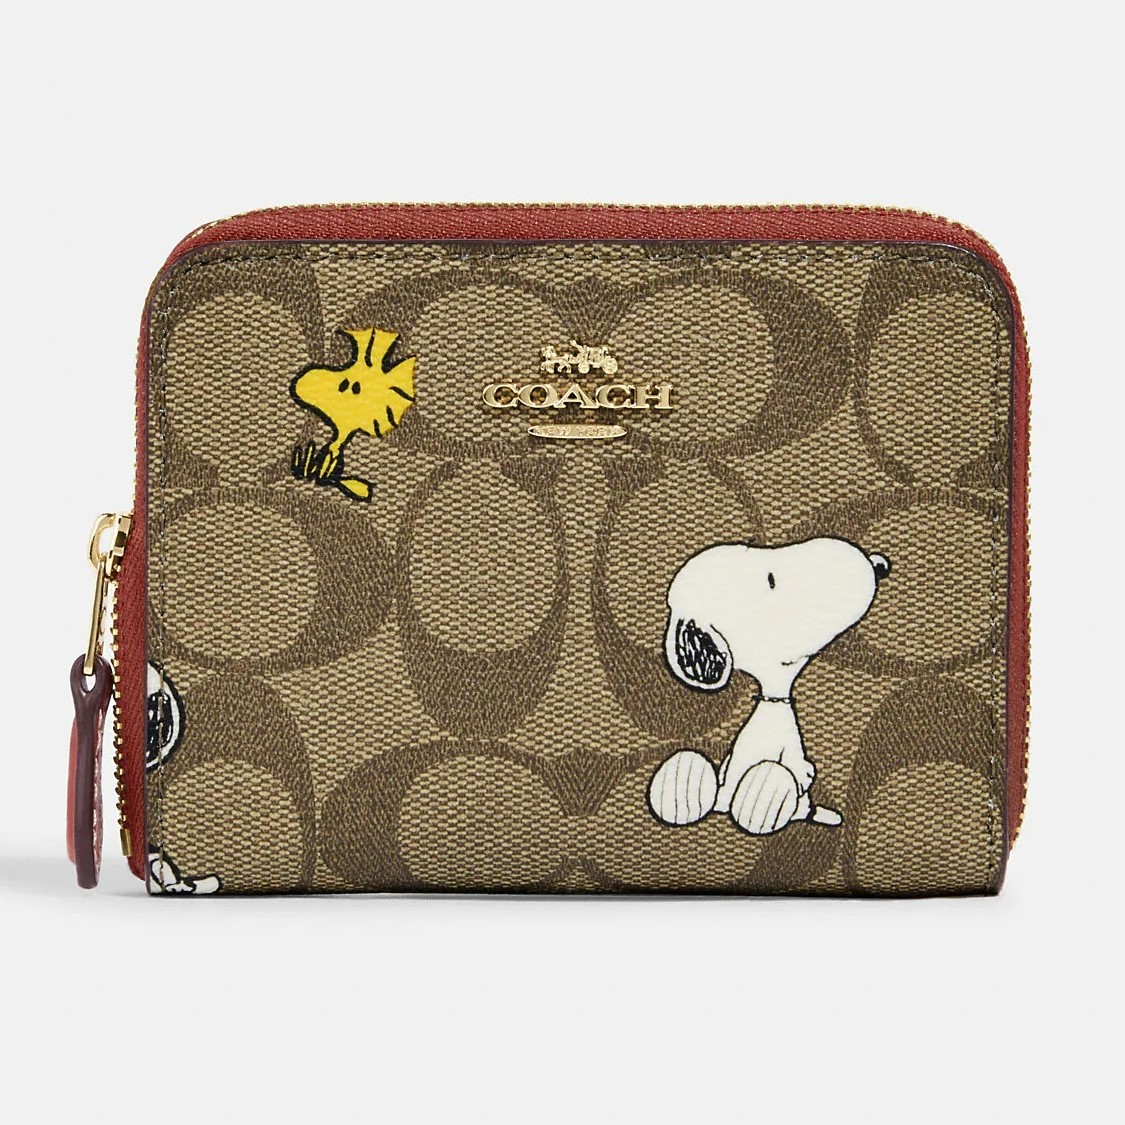 VÍ NGẮN NỮ NÂU SÁNG COACH X PEANUTS SMALL ZIP AROUND WALLET IN SIGNATURE CANVAS WITH SNOOPY PRESENTS PRINT 1